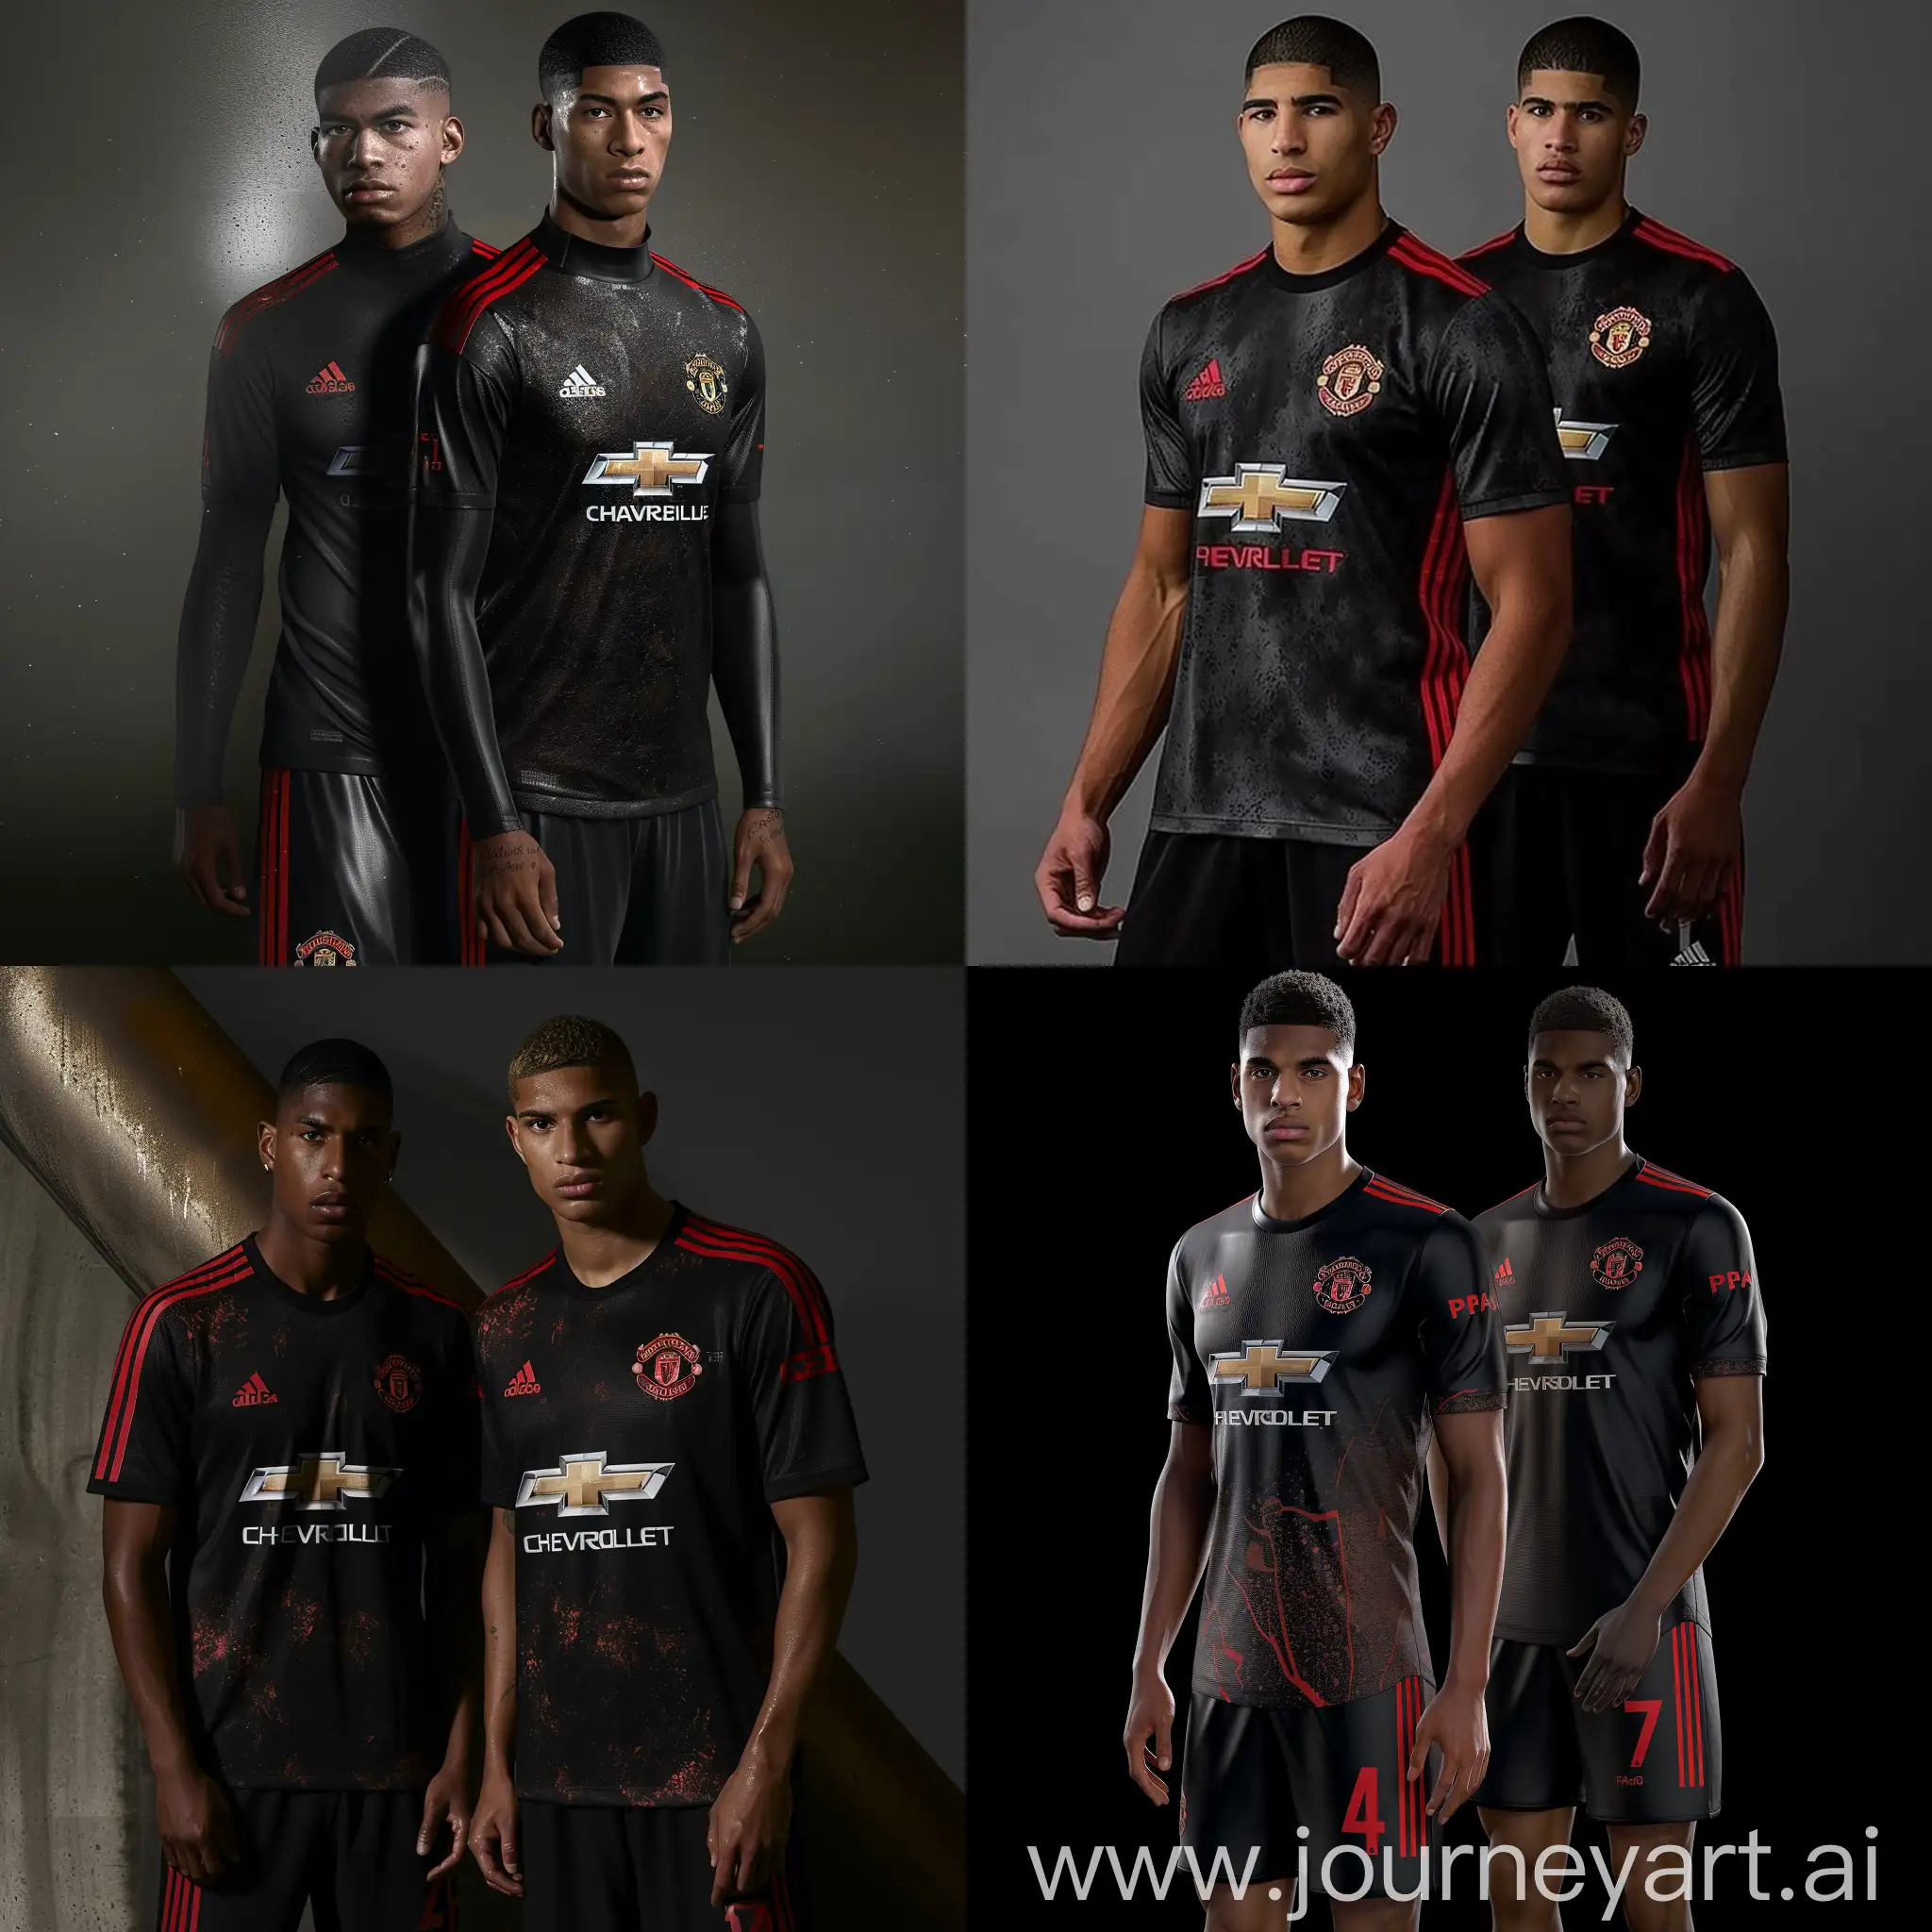 Prada-x-Adidas-Sport-Luxe-4th-Kit-for-Manchester-United-Minimalist-Elegance-with-Iconic-Motifs